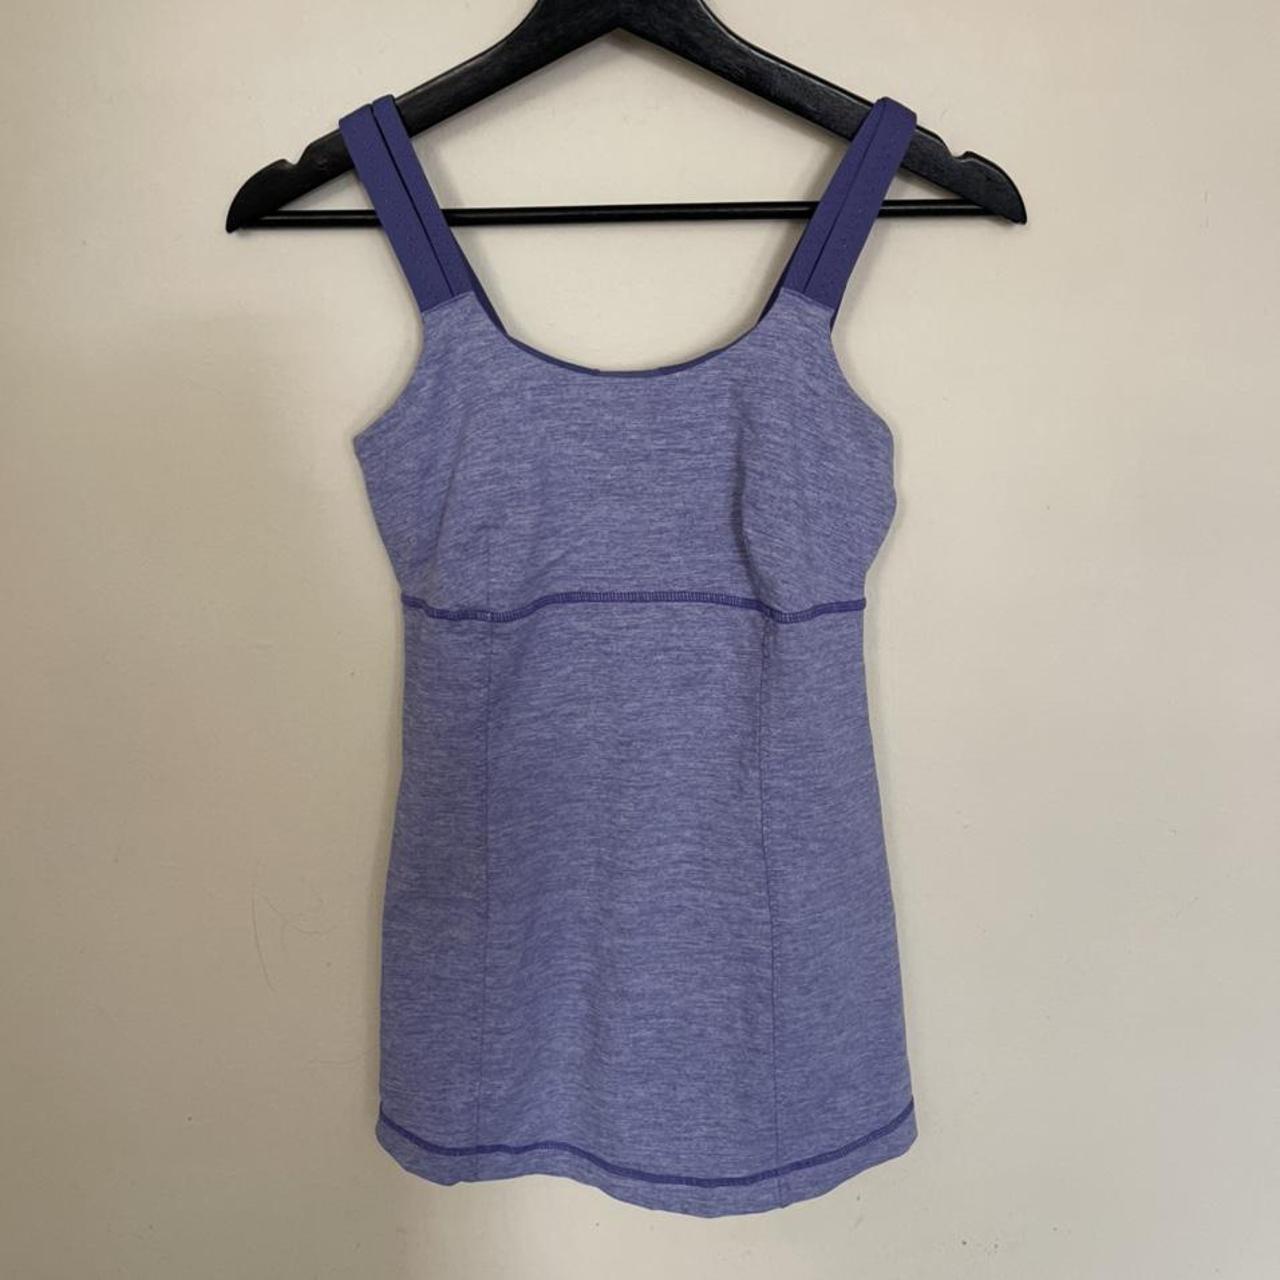 In Excellent Condition!!, Lululemon Active Strength